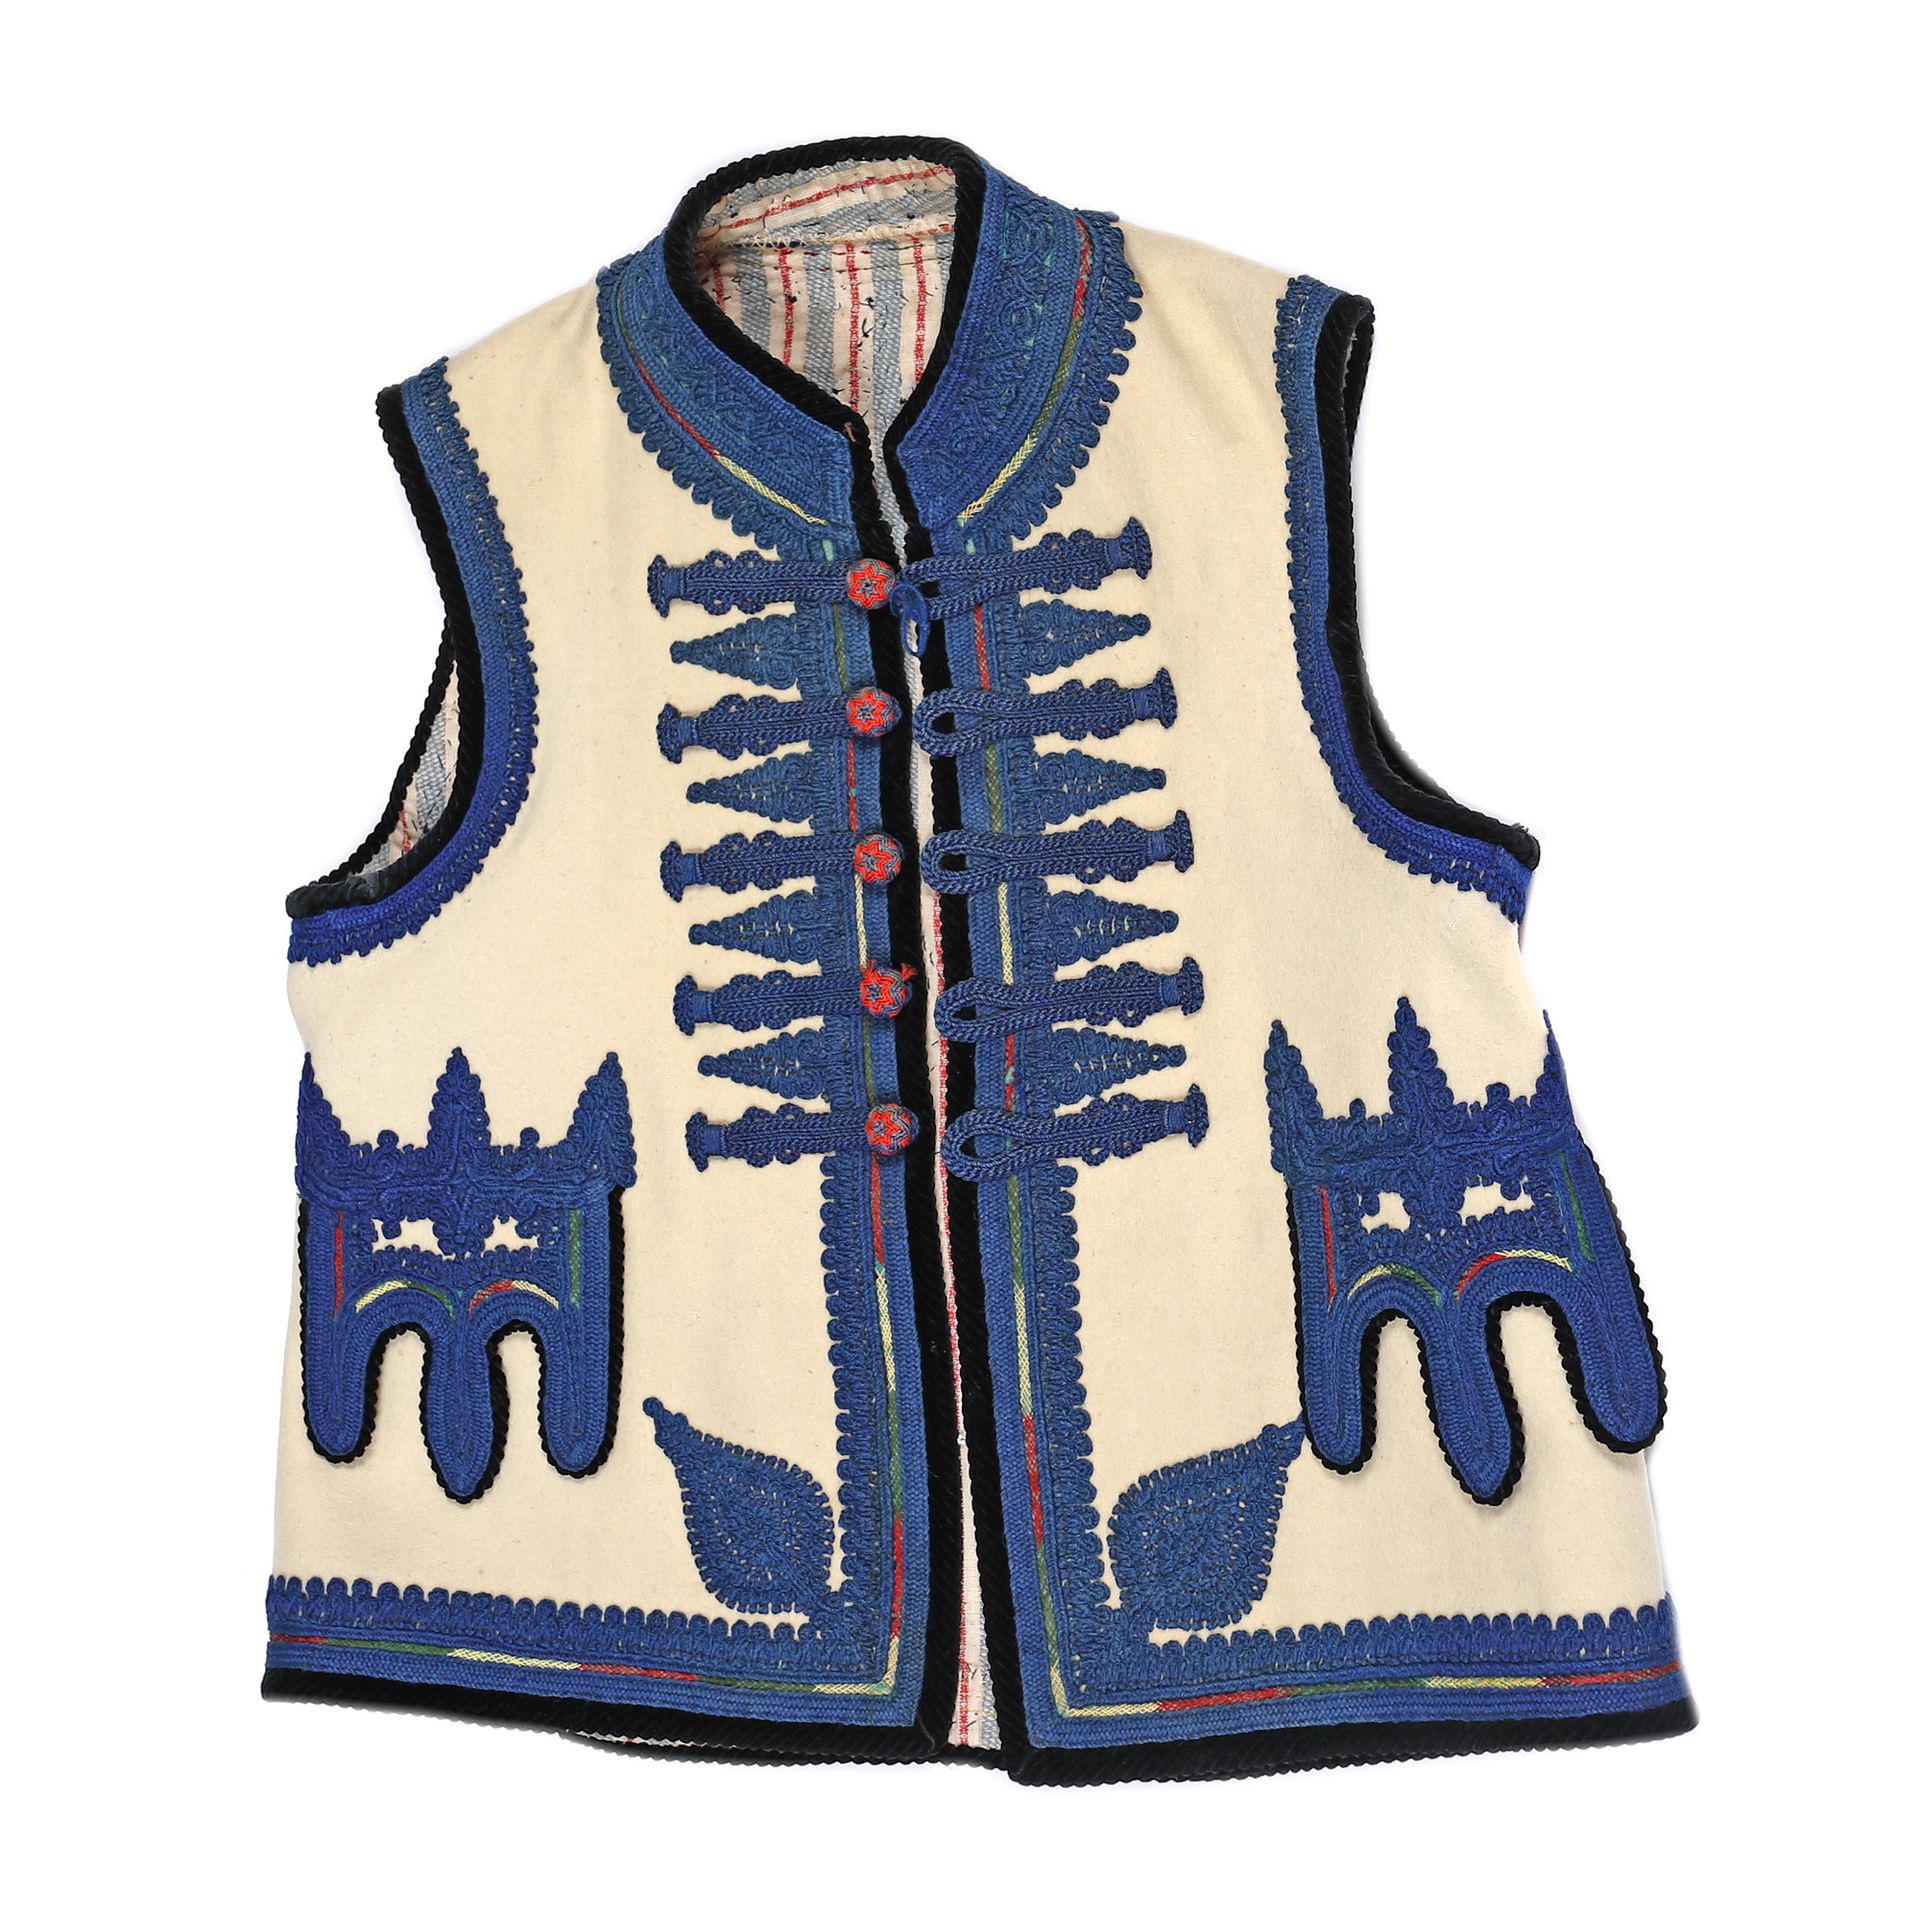 Vest from Banat, made of wool, ca. 1910 lana